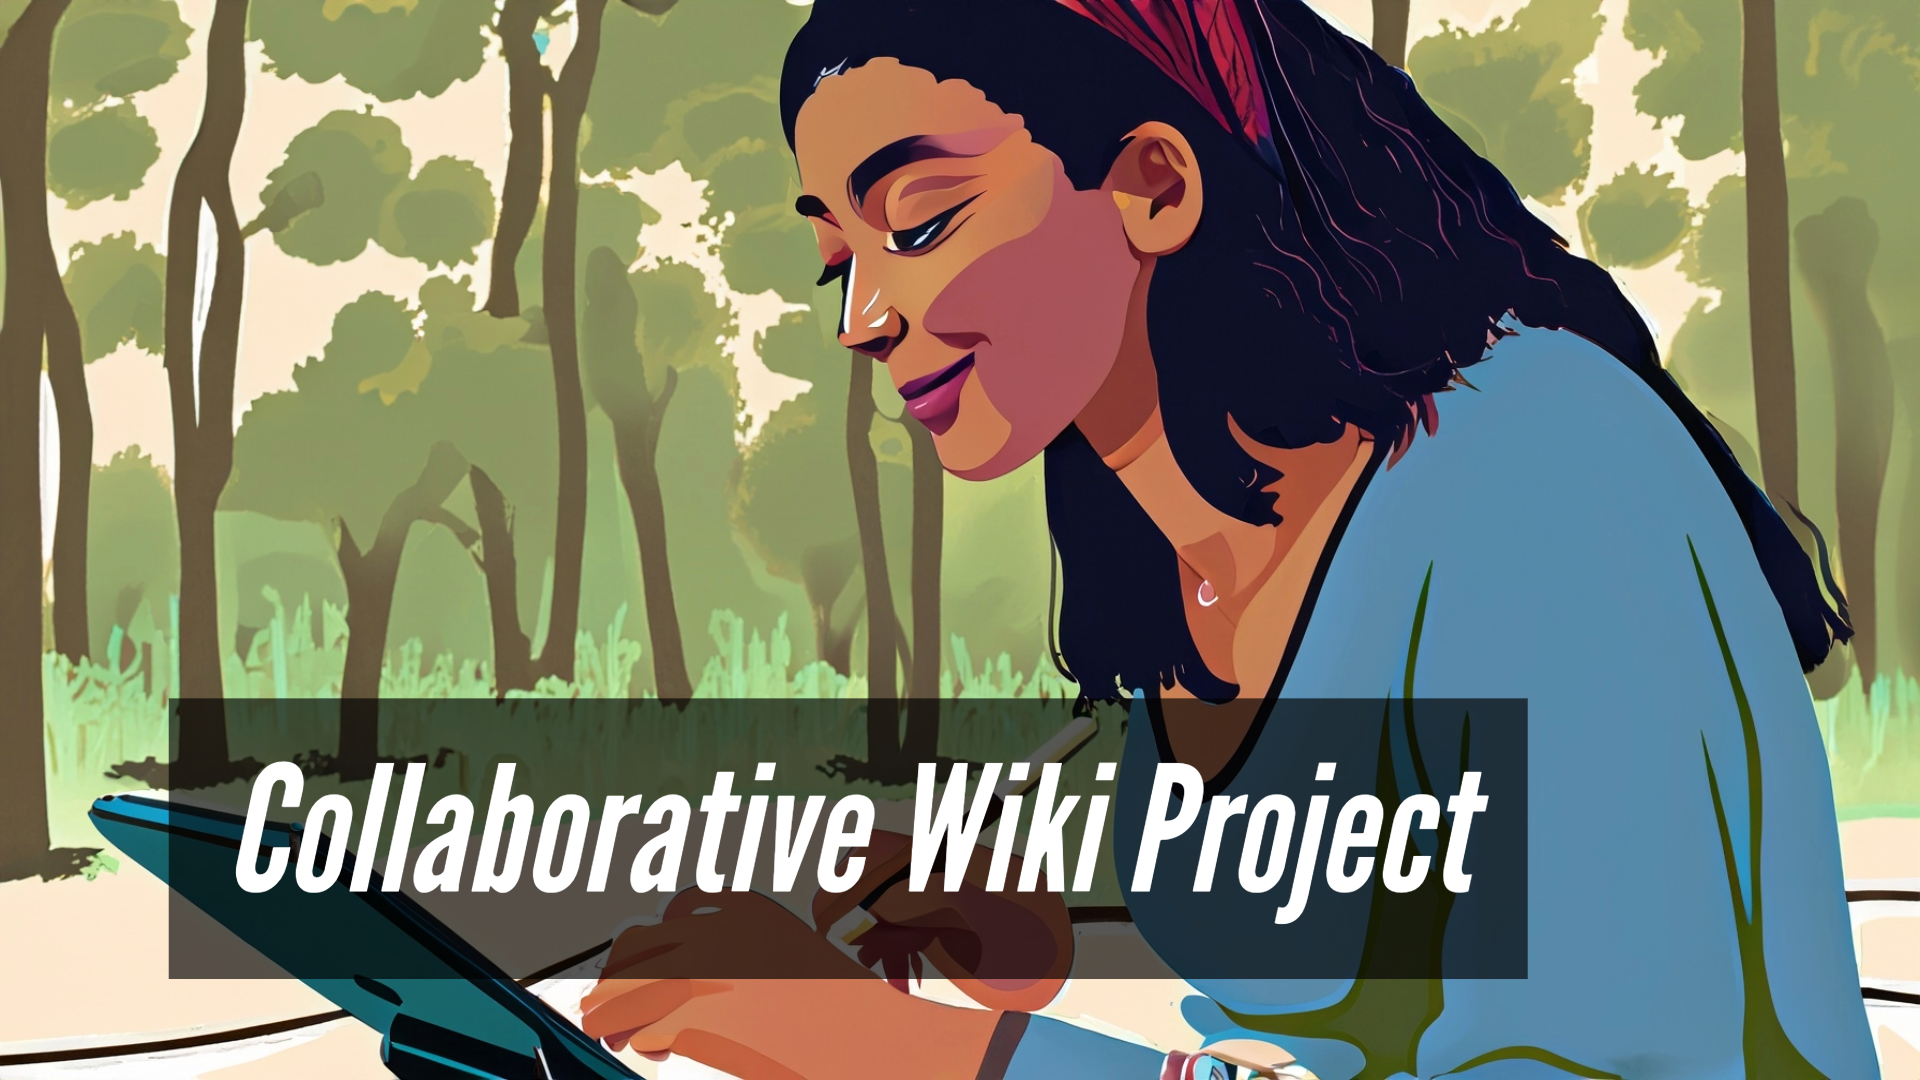 Wiki Collaboration Fosters Digital Literacy and Collective Knowledge